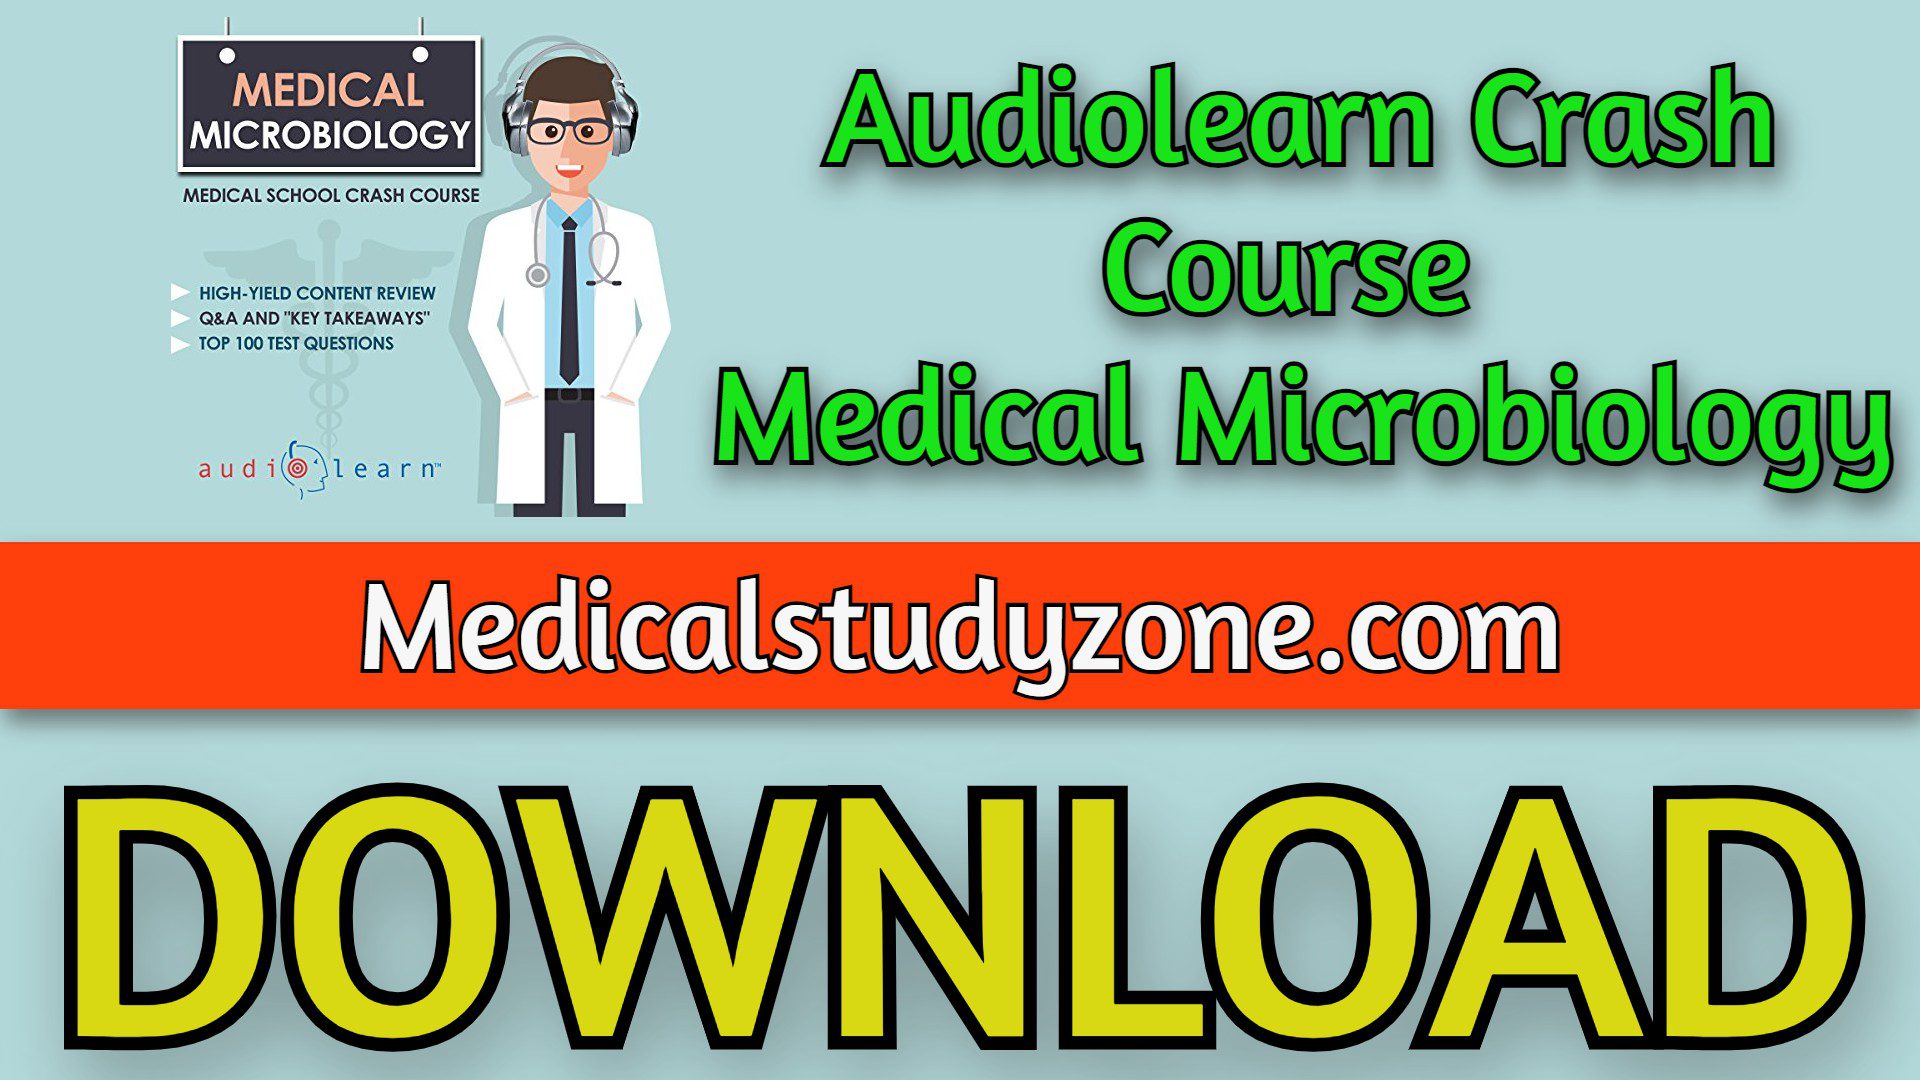 Audiolearn Crash Course Medical Microbiology 2021 Free Download